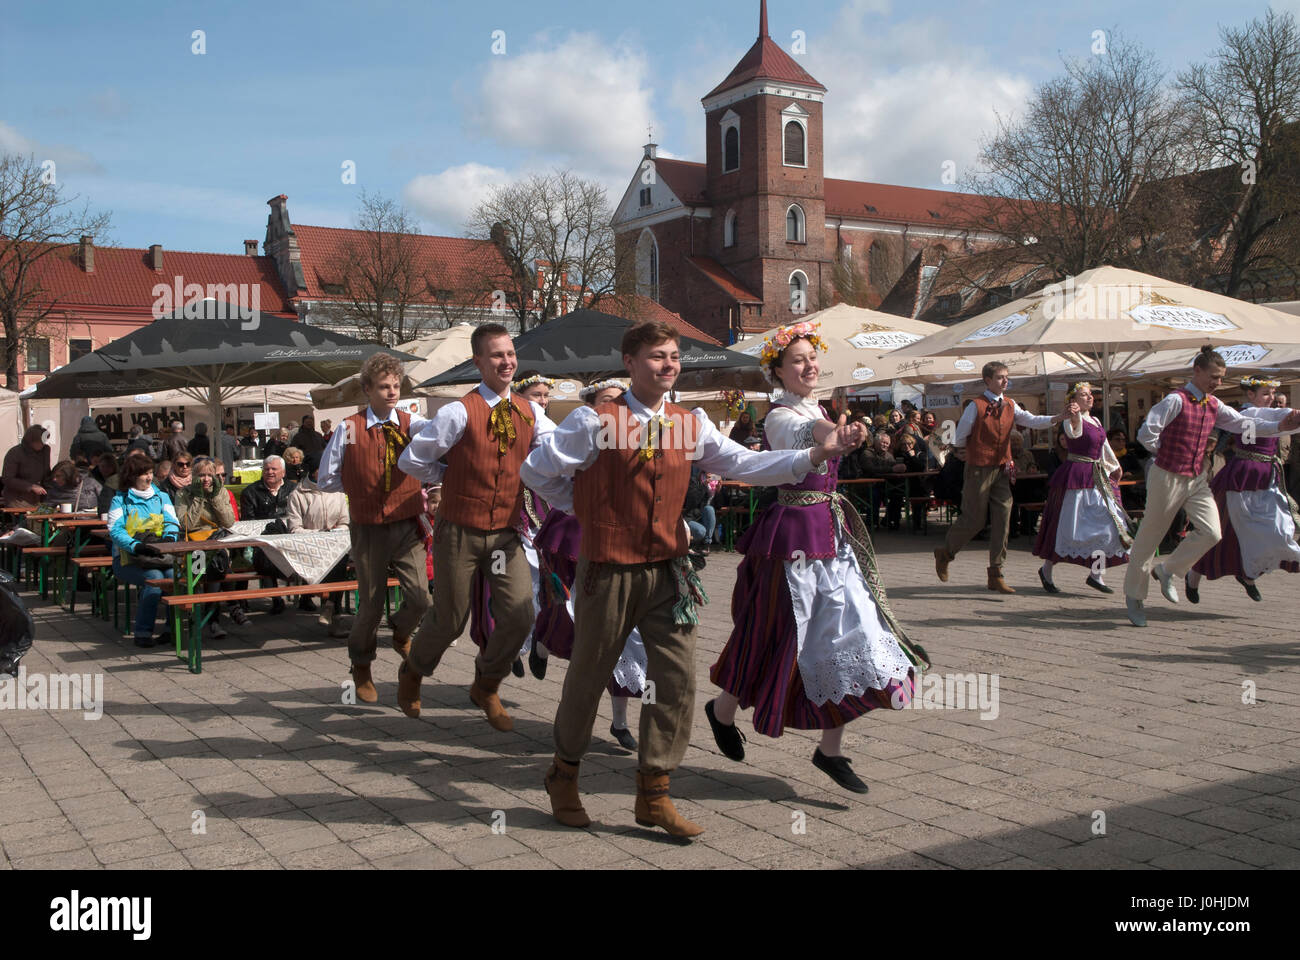 Kaunas Lithuania folk traditional dancing in the Town Hall Square Old Town during the Spring market fair. 2017 2010s, HOMER SYKES Stock Photo